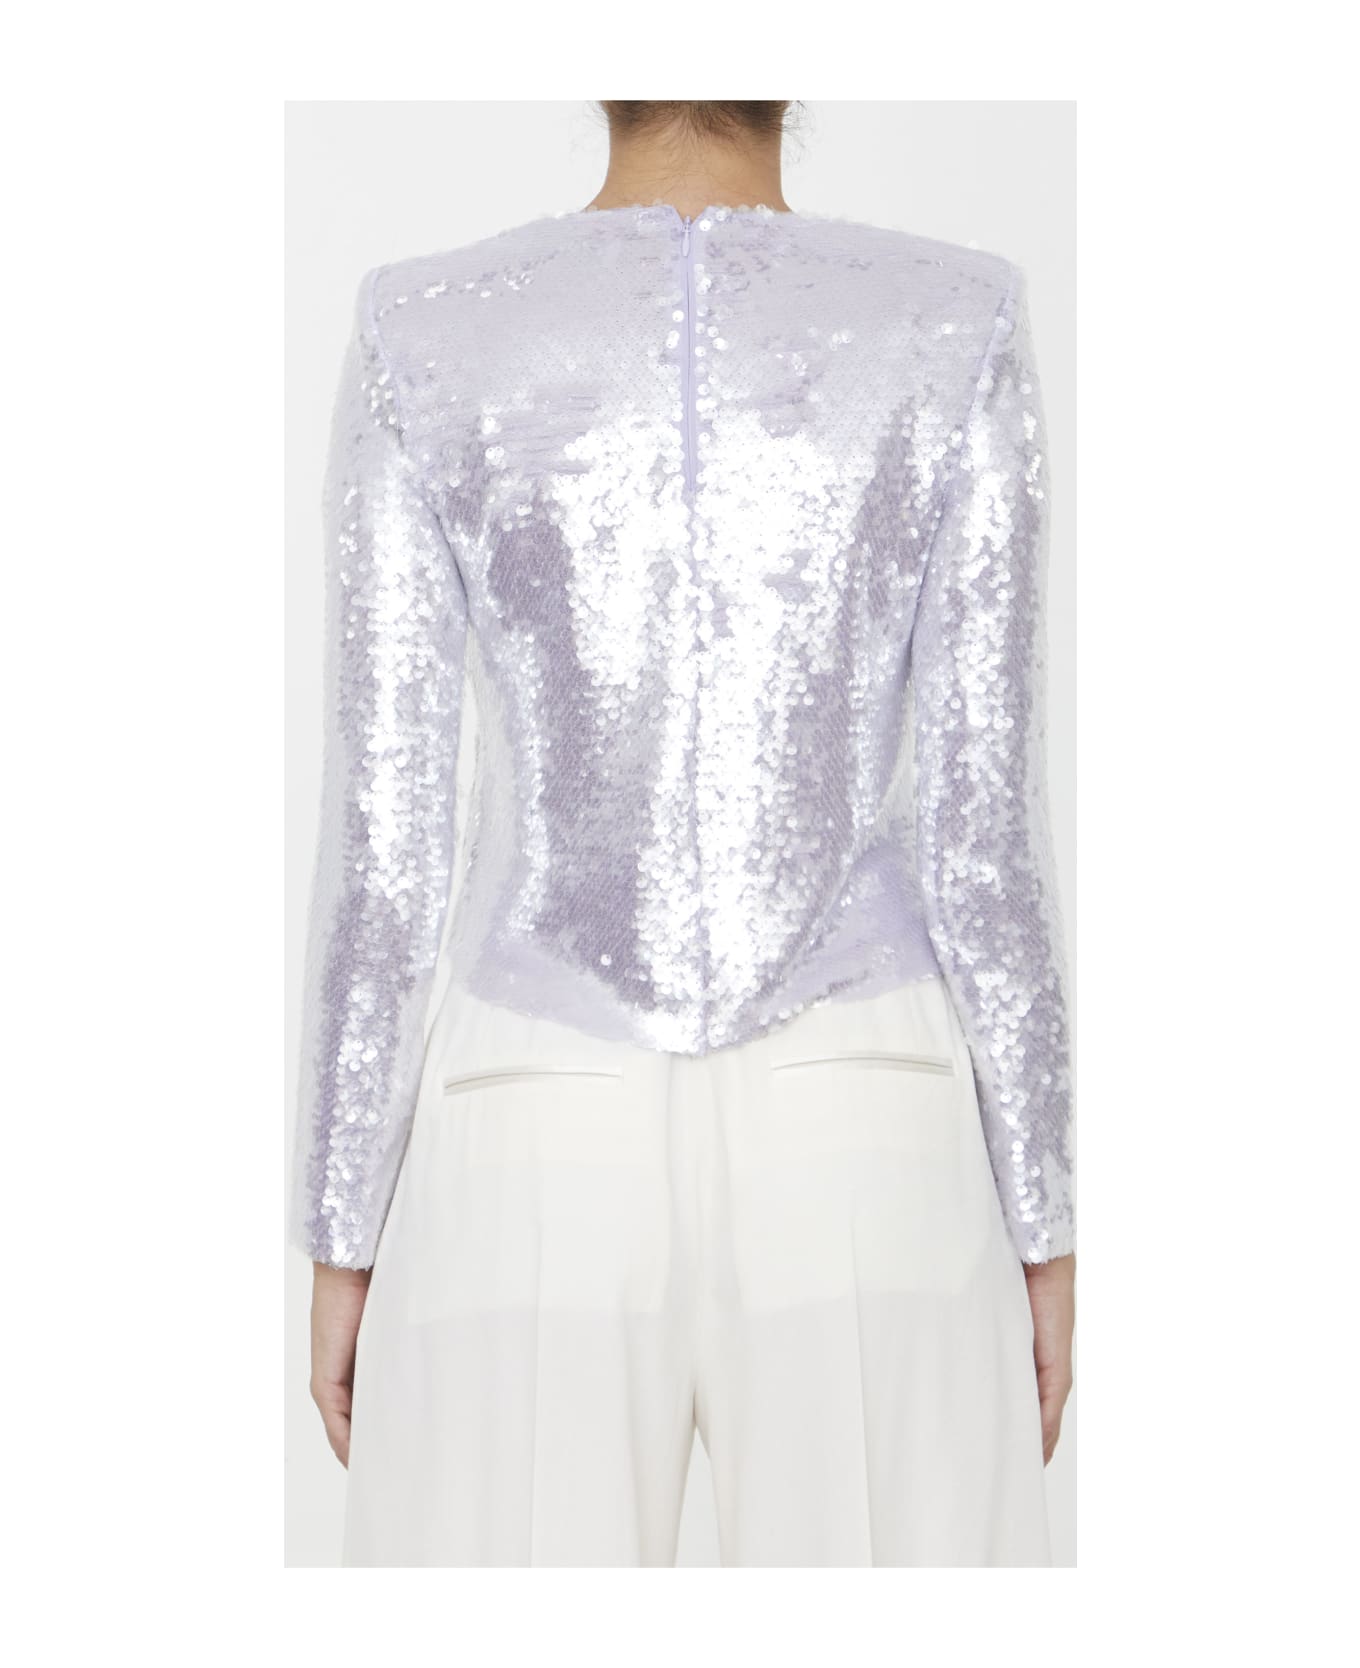 self-portrait Sequined Top - LILAC